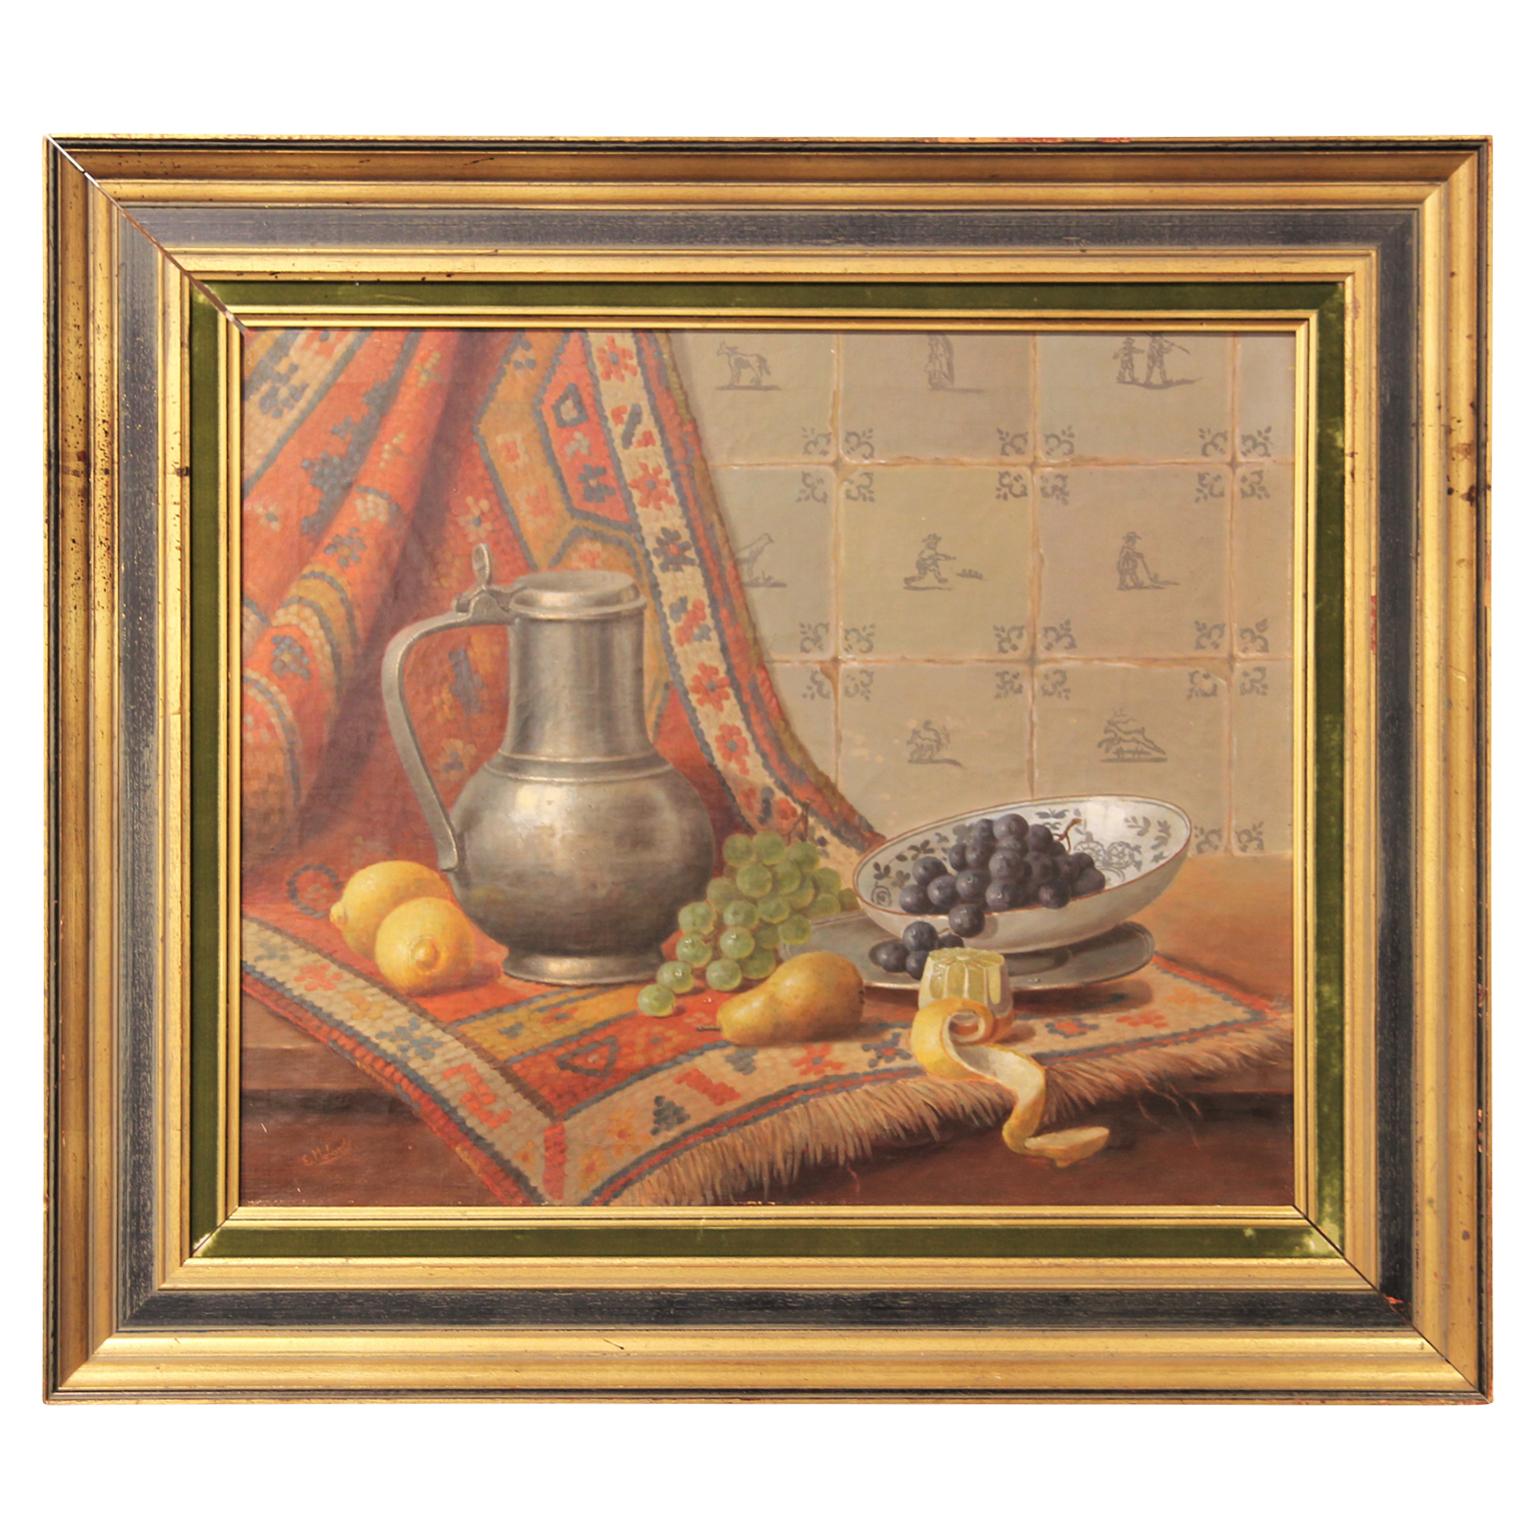 Classical Dutch Interior Still Life Painting of a Water Jug, Fruit, and Tapestry